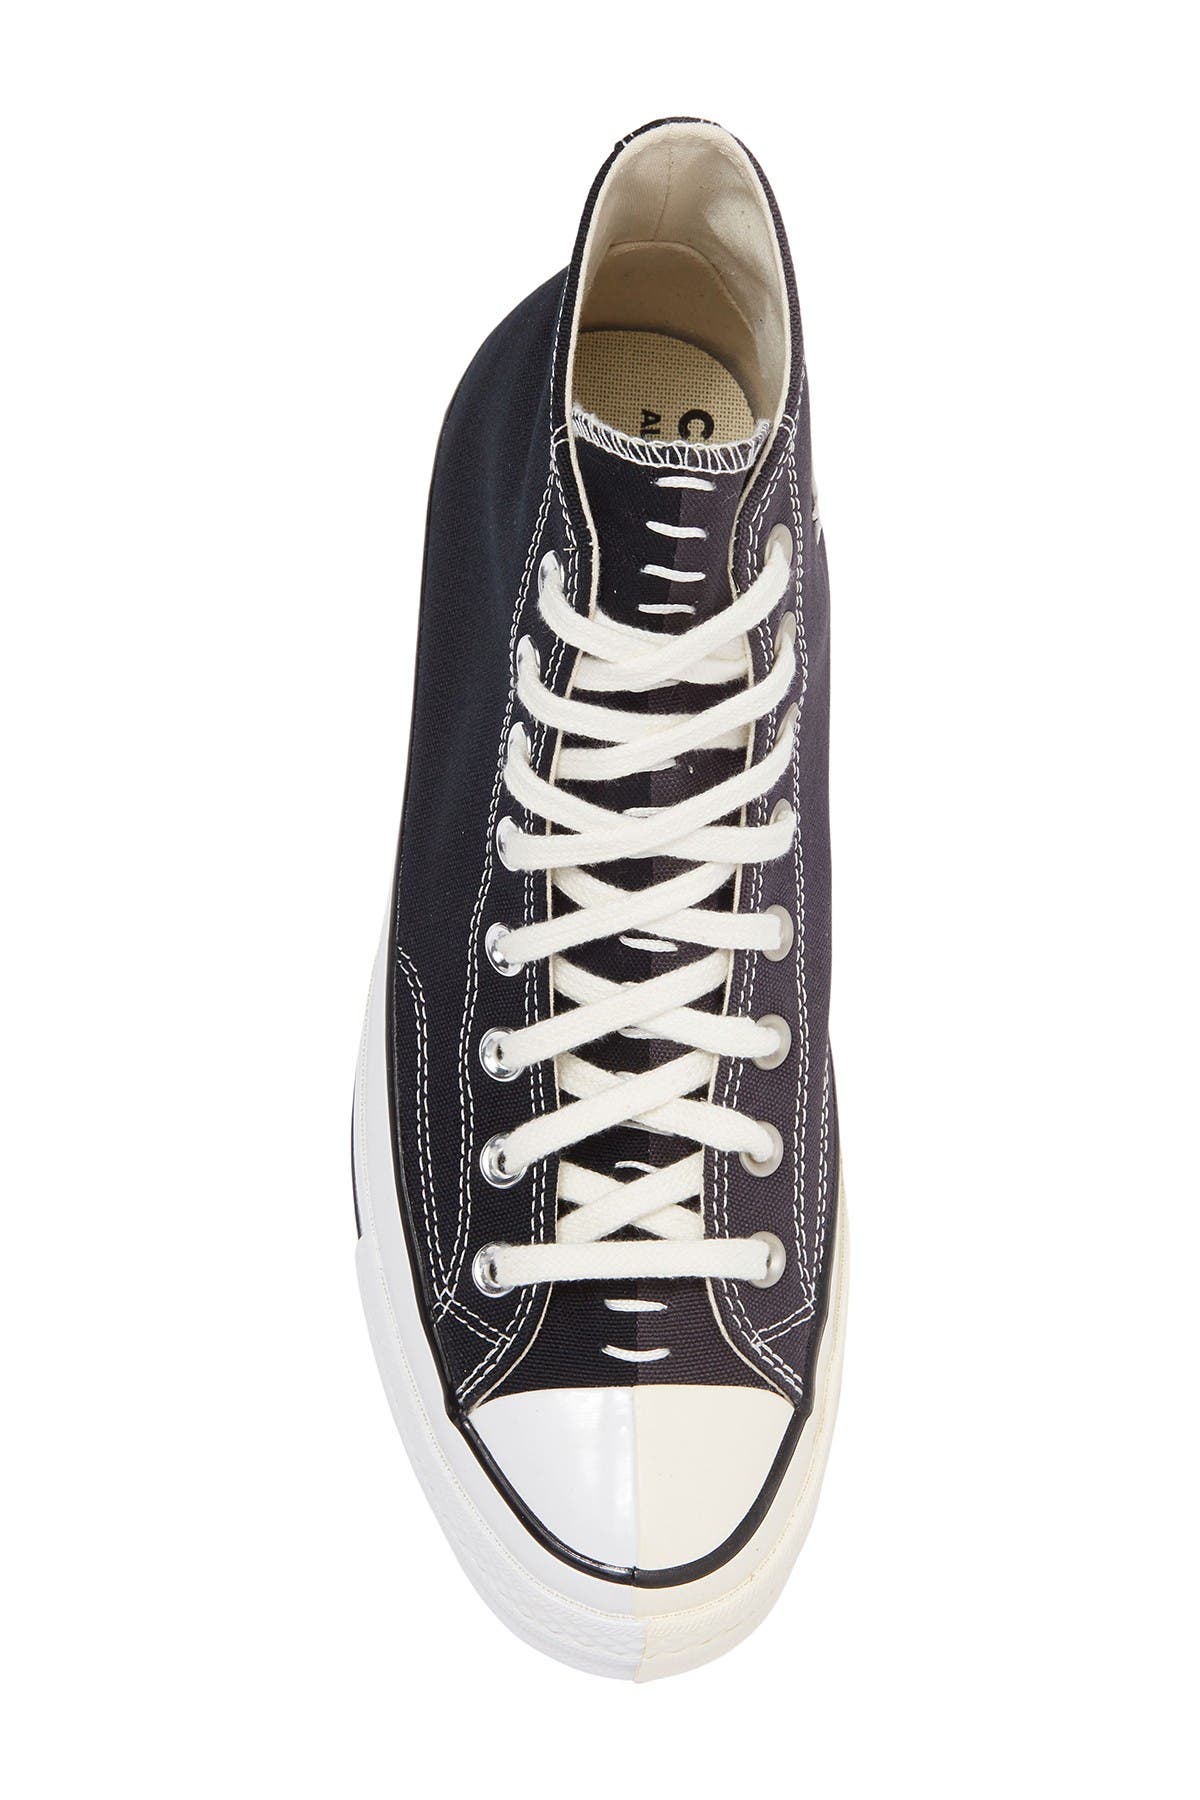 converse 70s restructured